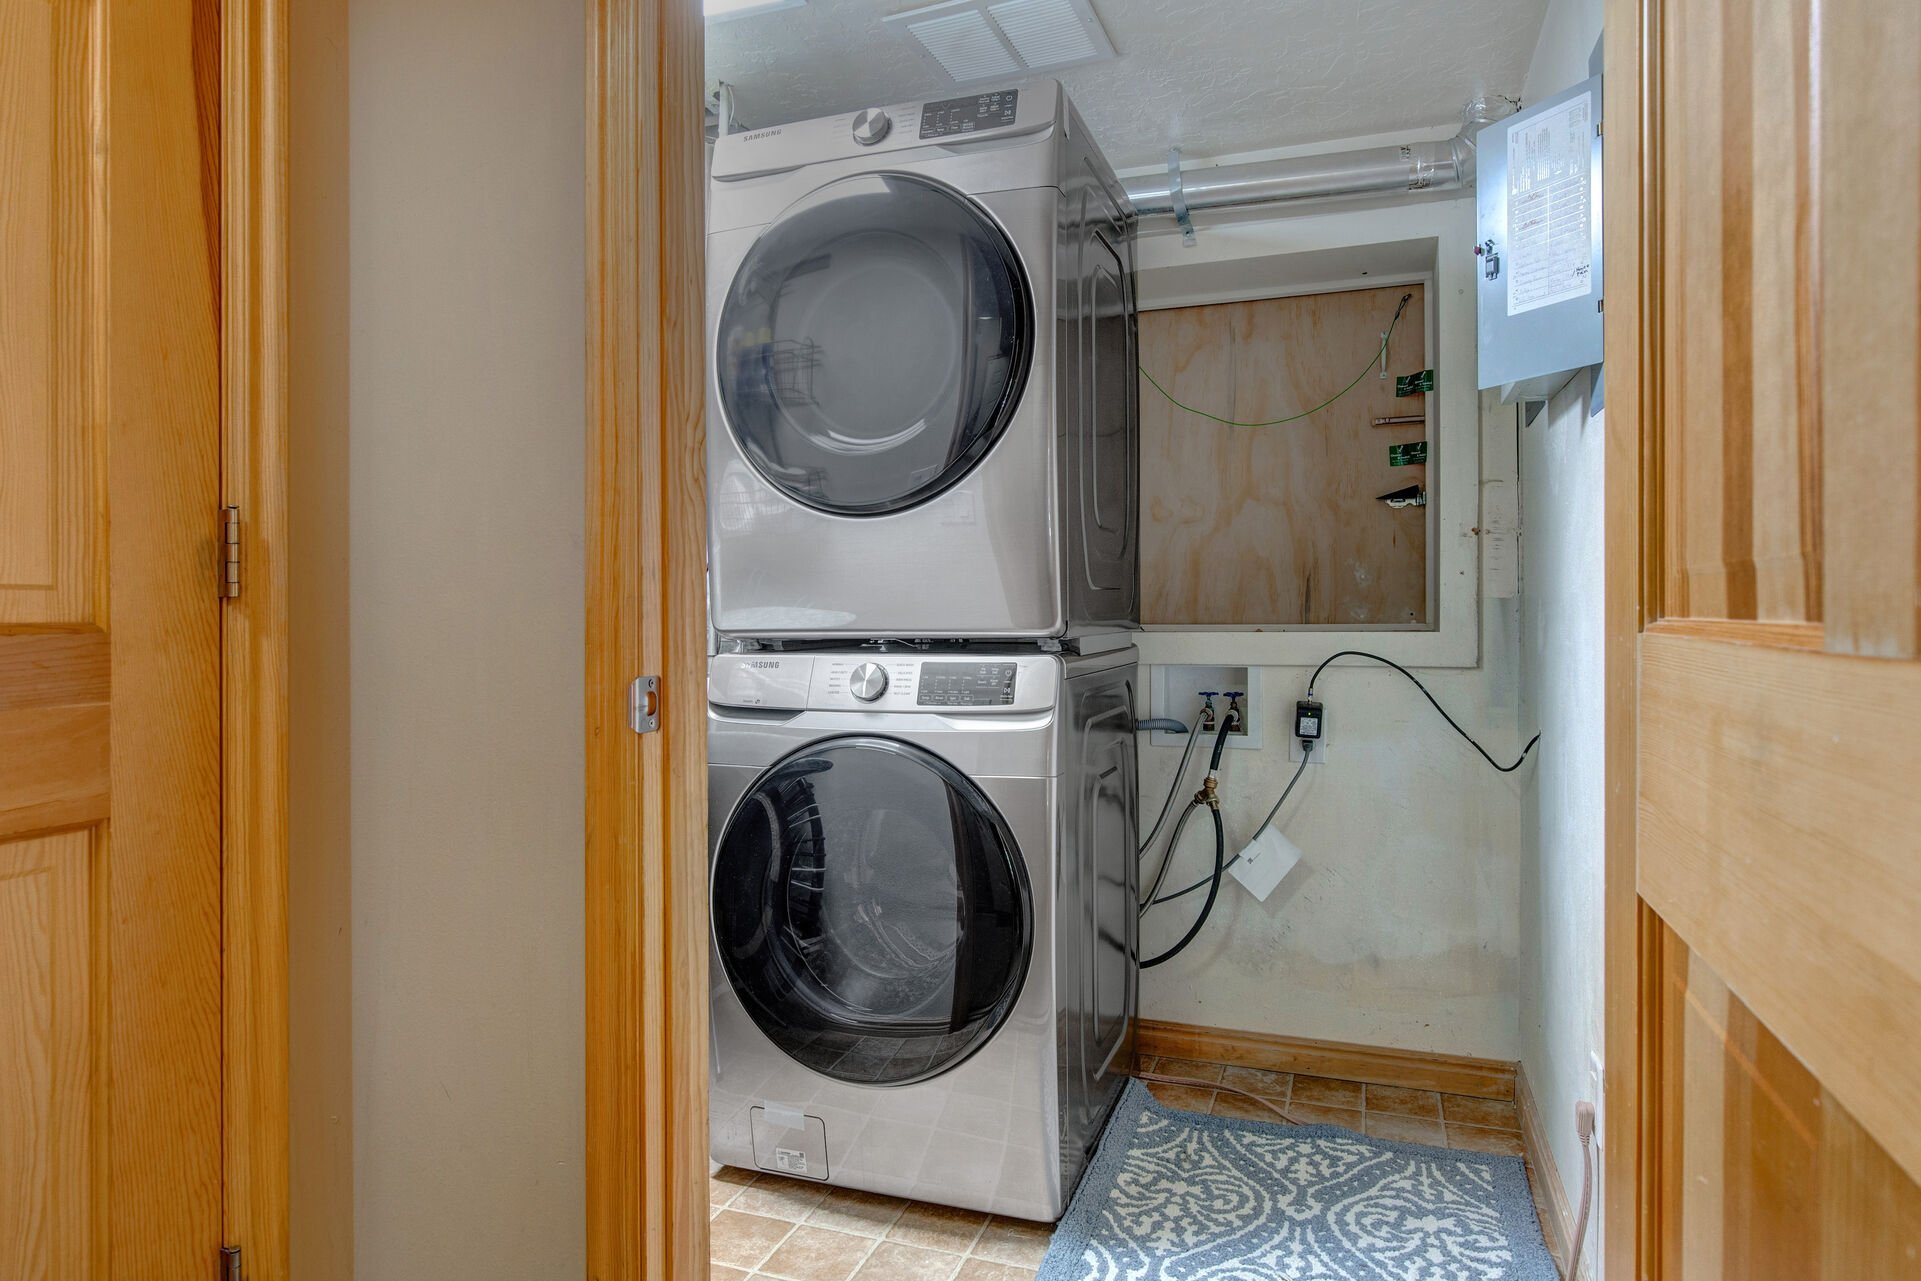 Private washer/dryer units